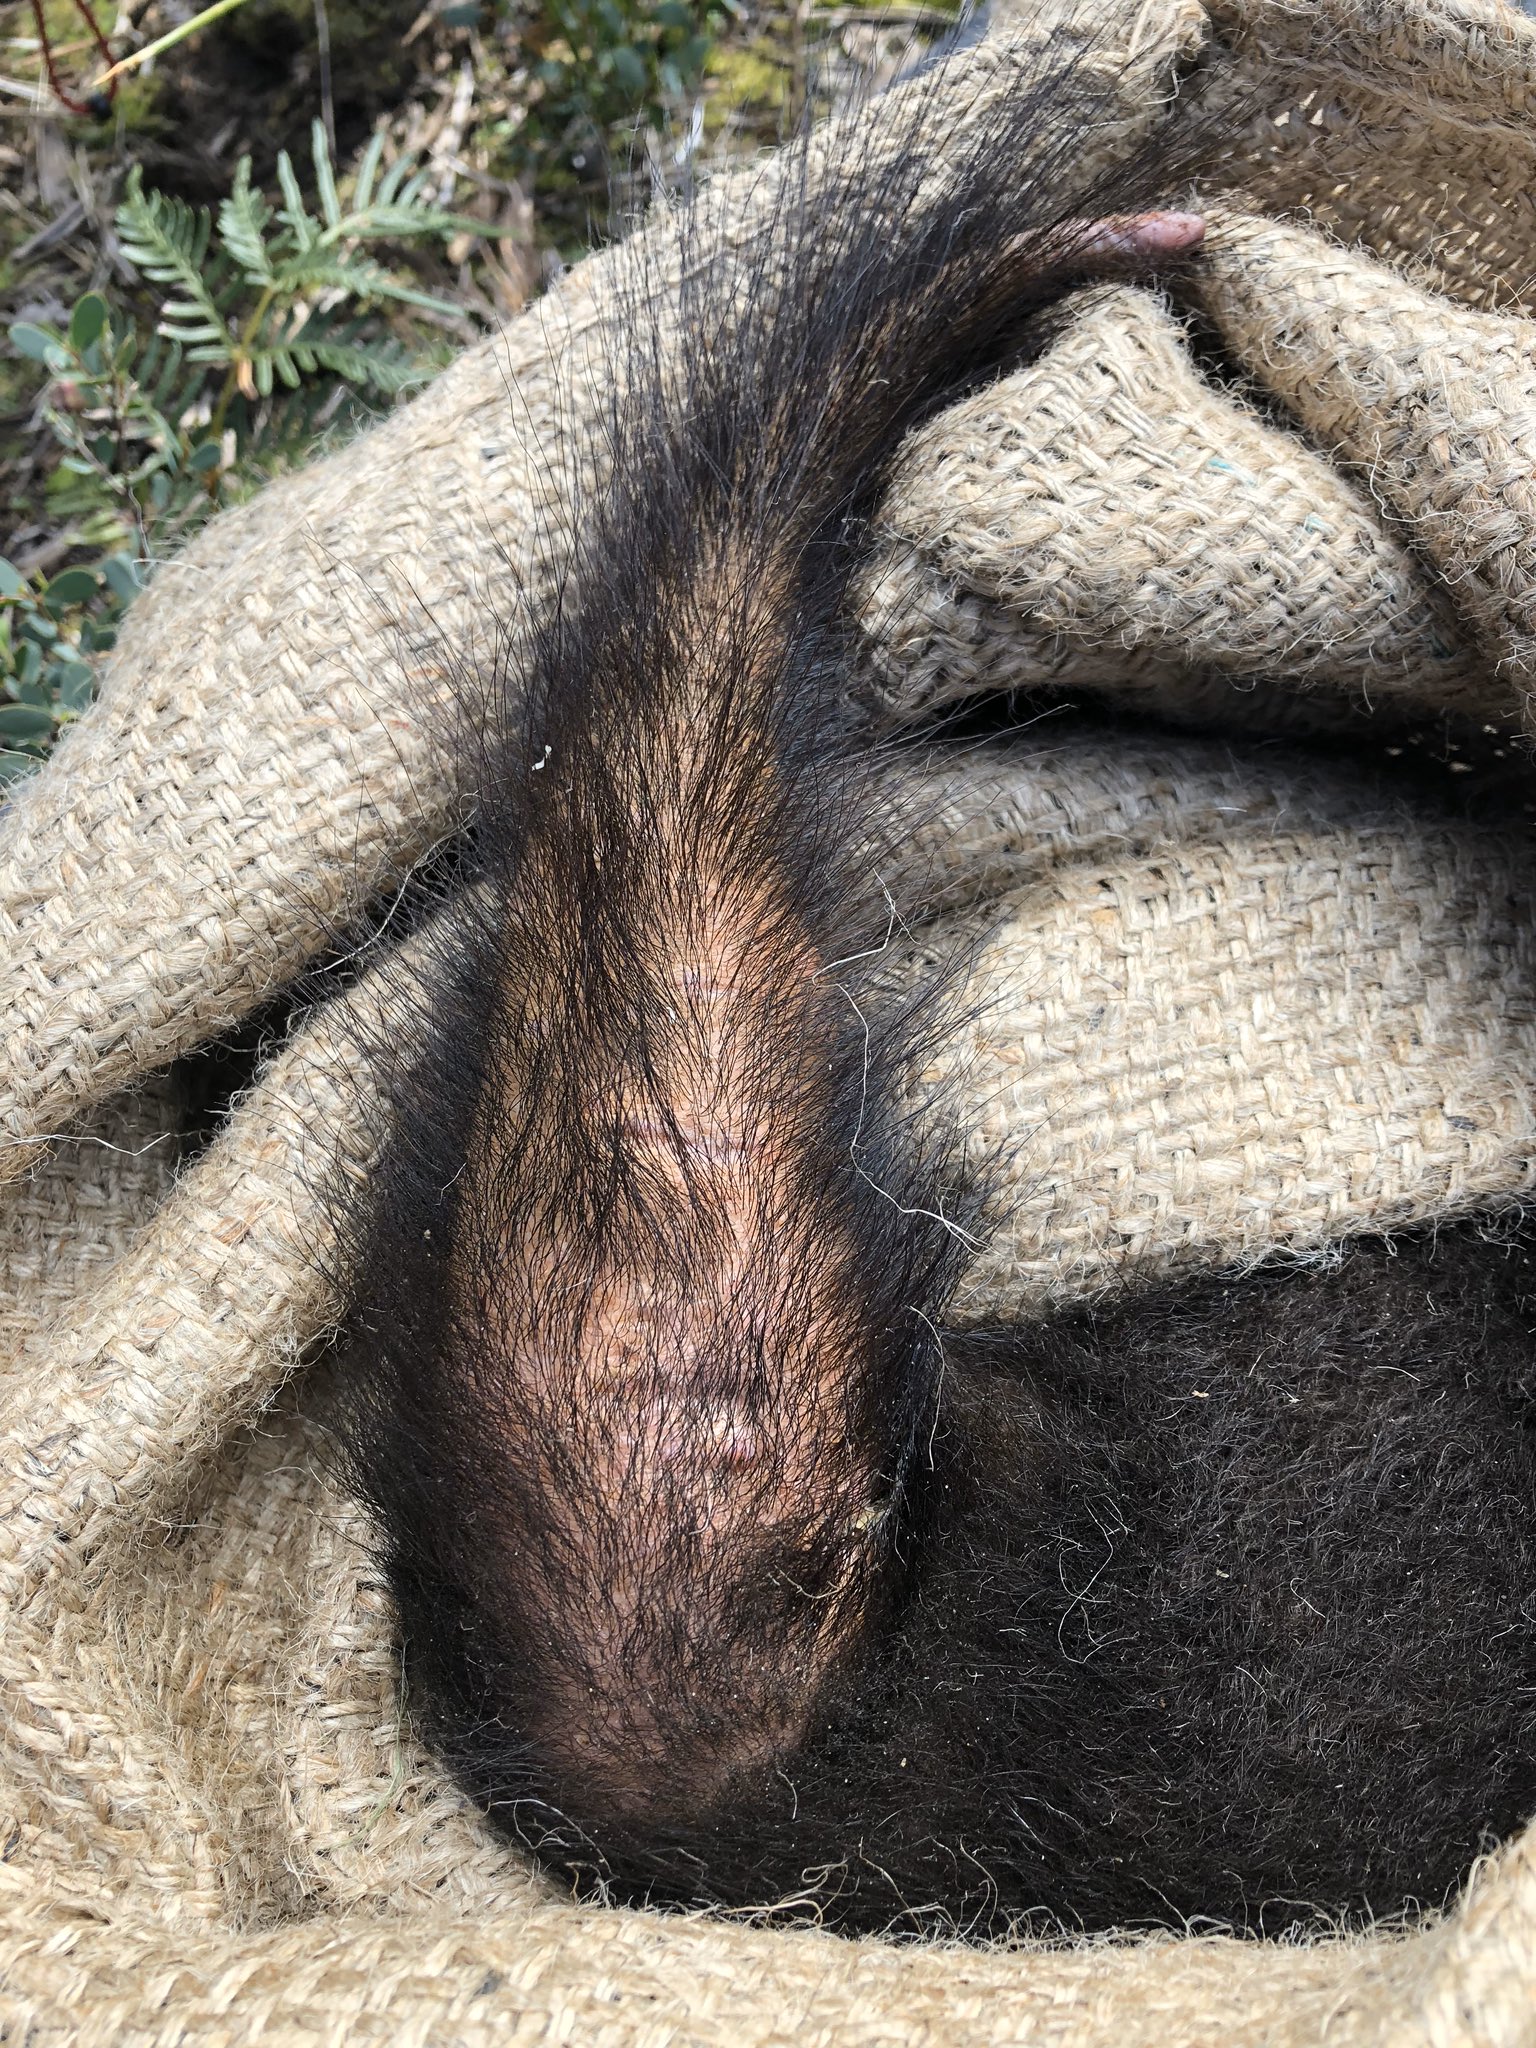 Dr David Hamilton on X: Some of the Tasmanian devil joeys are starting to  get a bit of peach fuzz - they'll be hairy little devils in no time!   / X